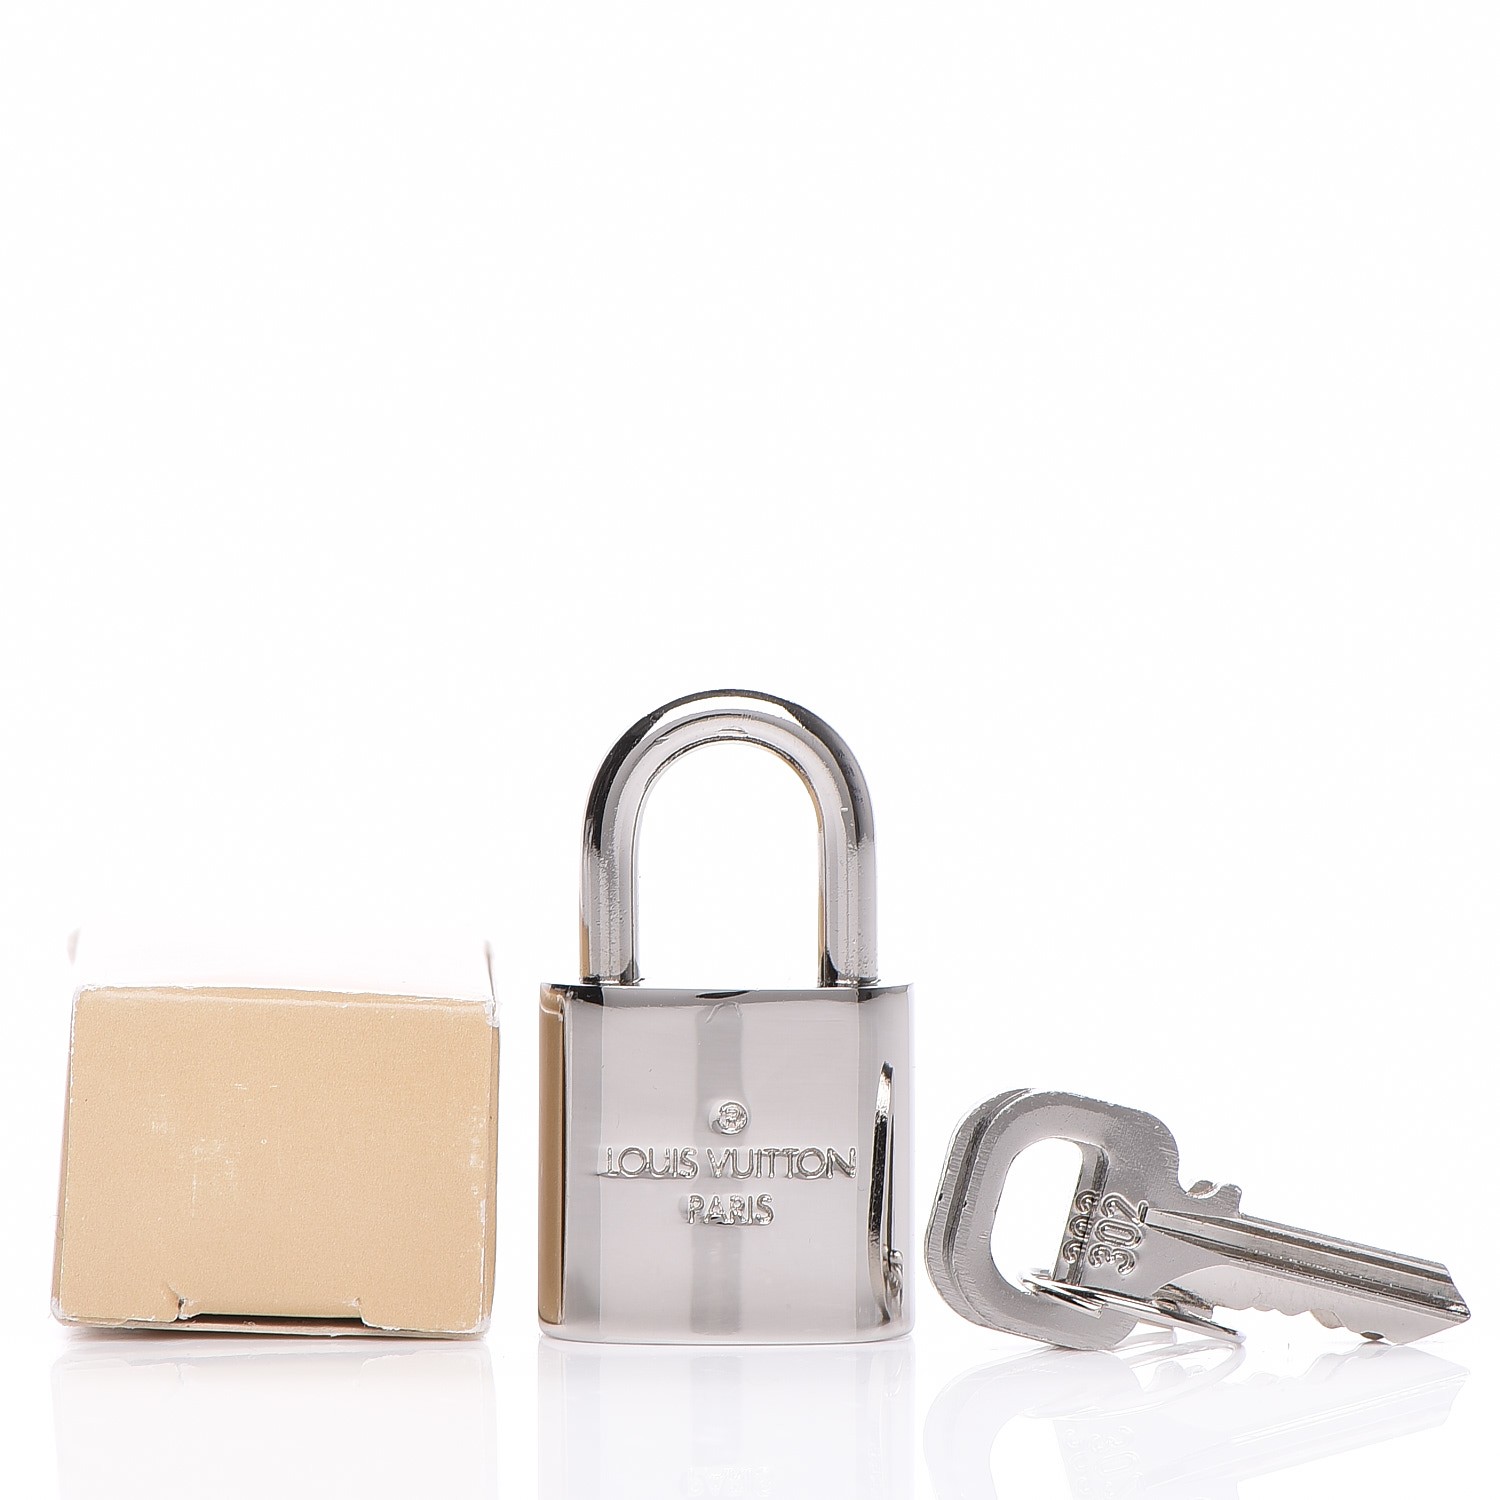 LOUIS VUITTON Polished Silver Lock and Key Set 159208